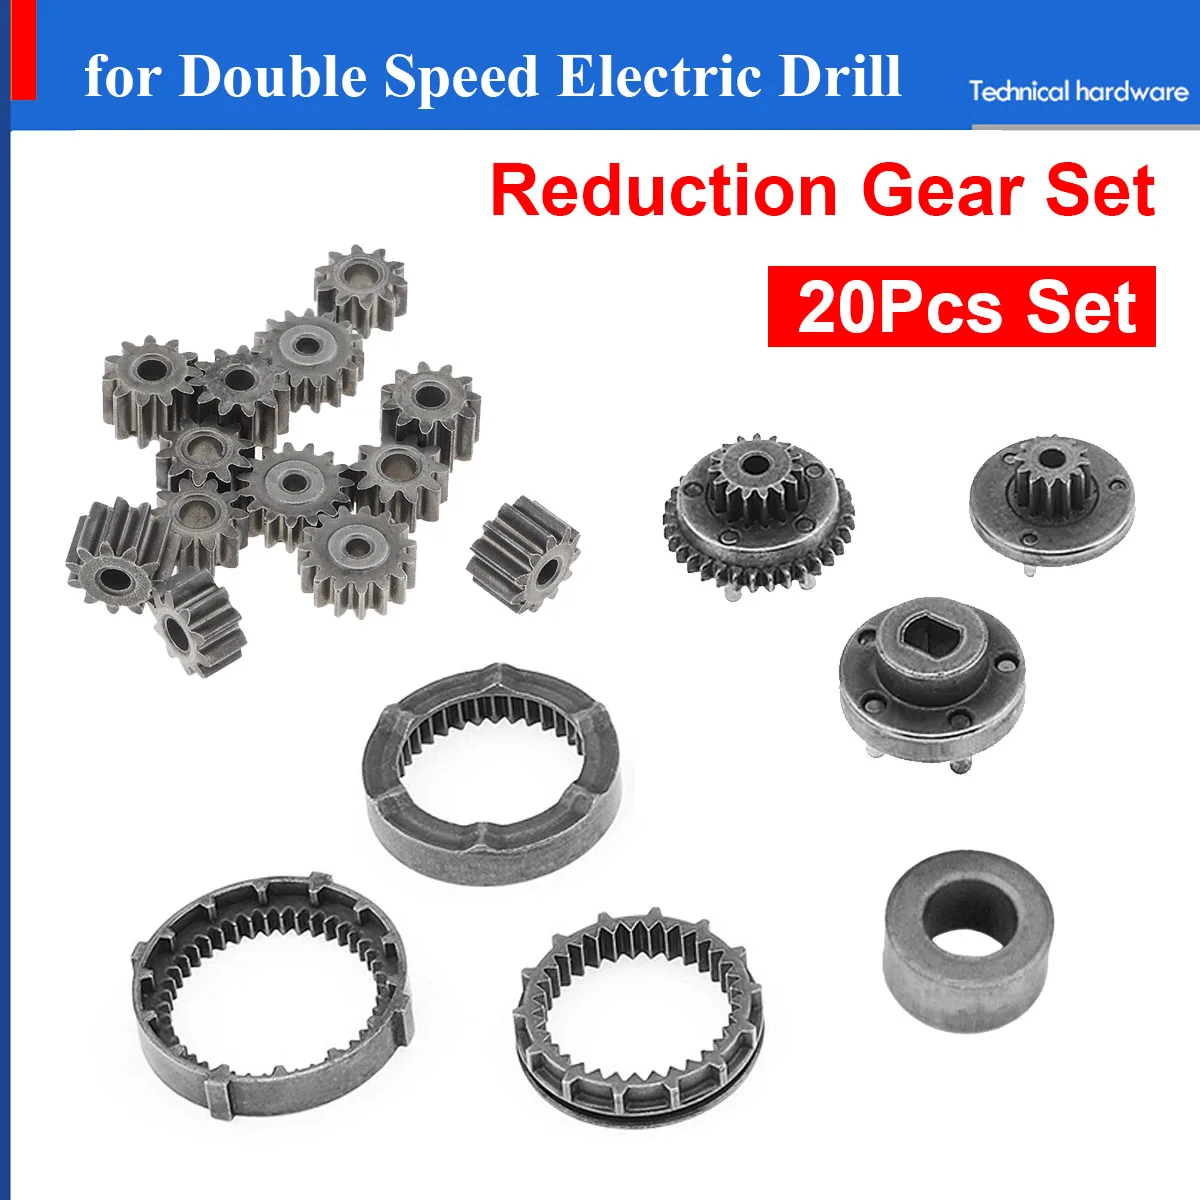 Two-Speed Charging Drill Gear Set 12V Double Speed Planetary Gear Set Reduction Gear Accessories Working Effect